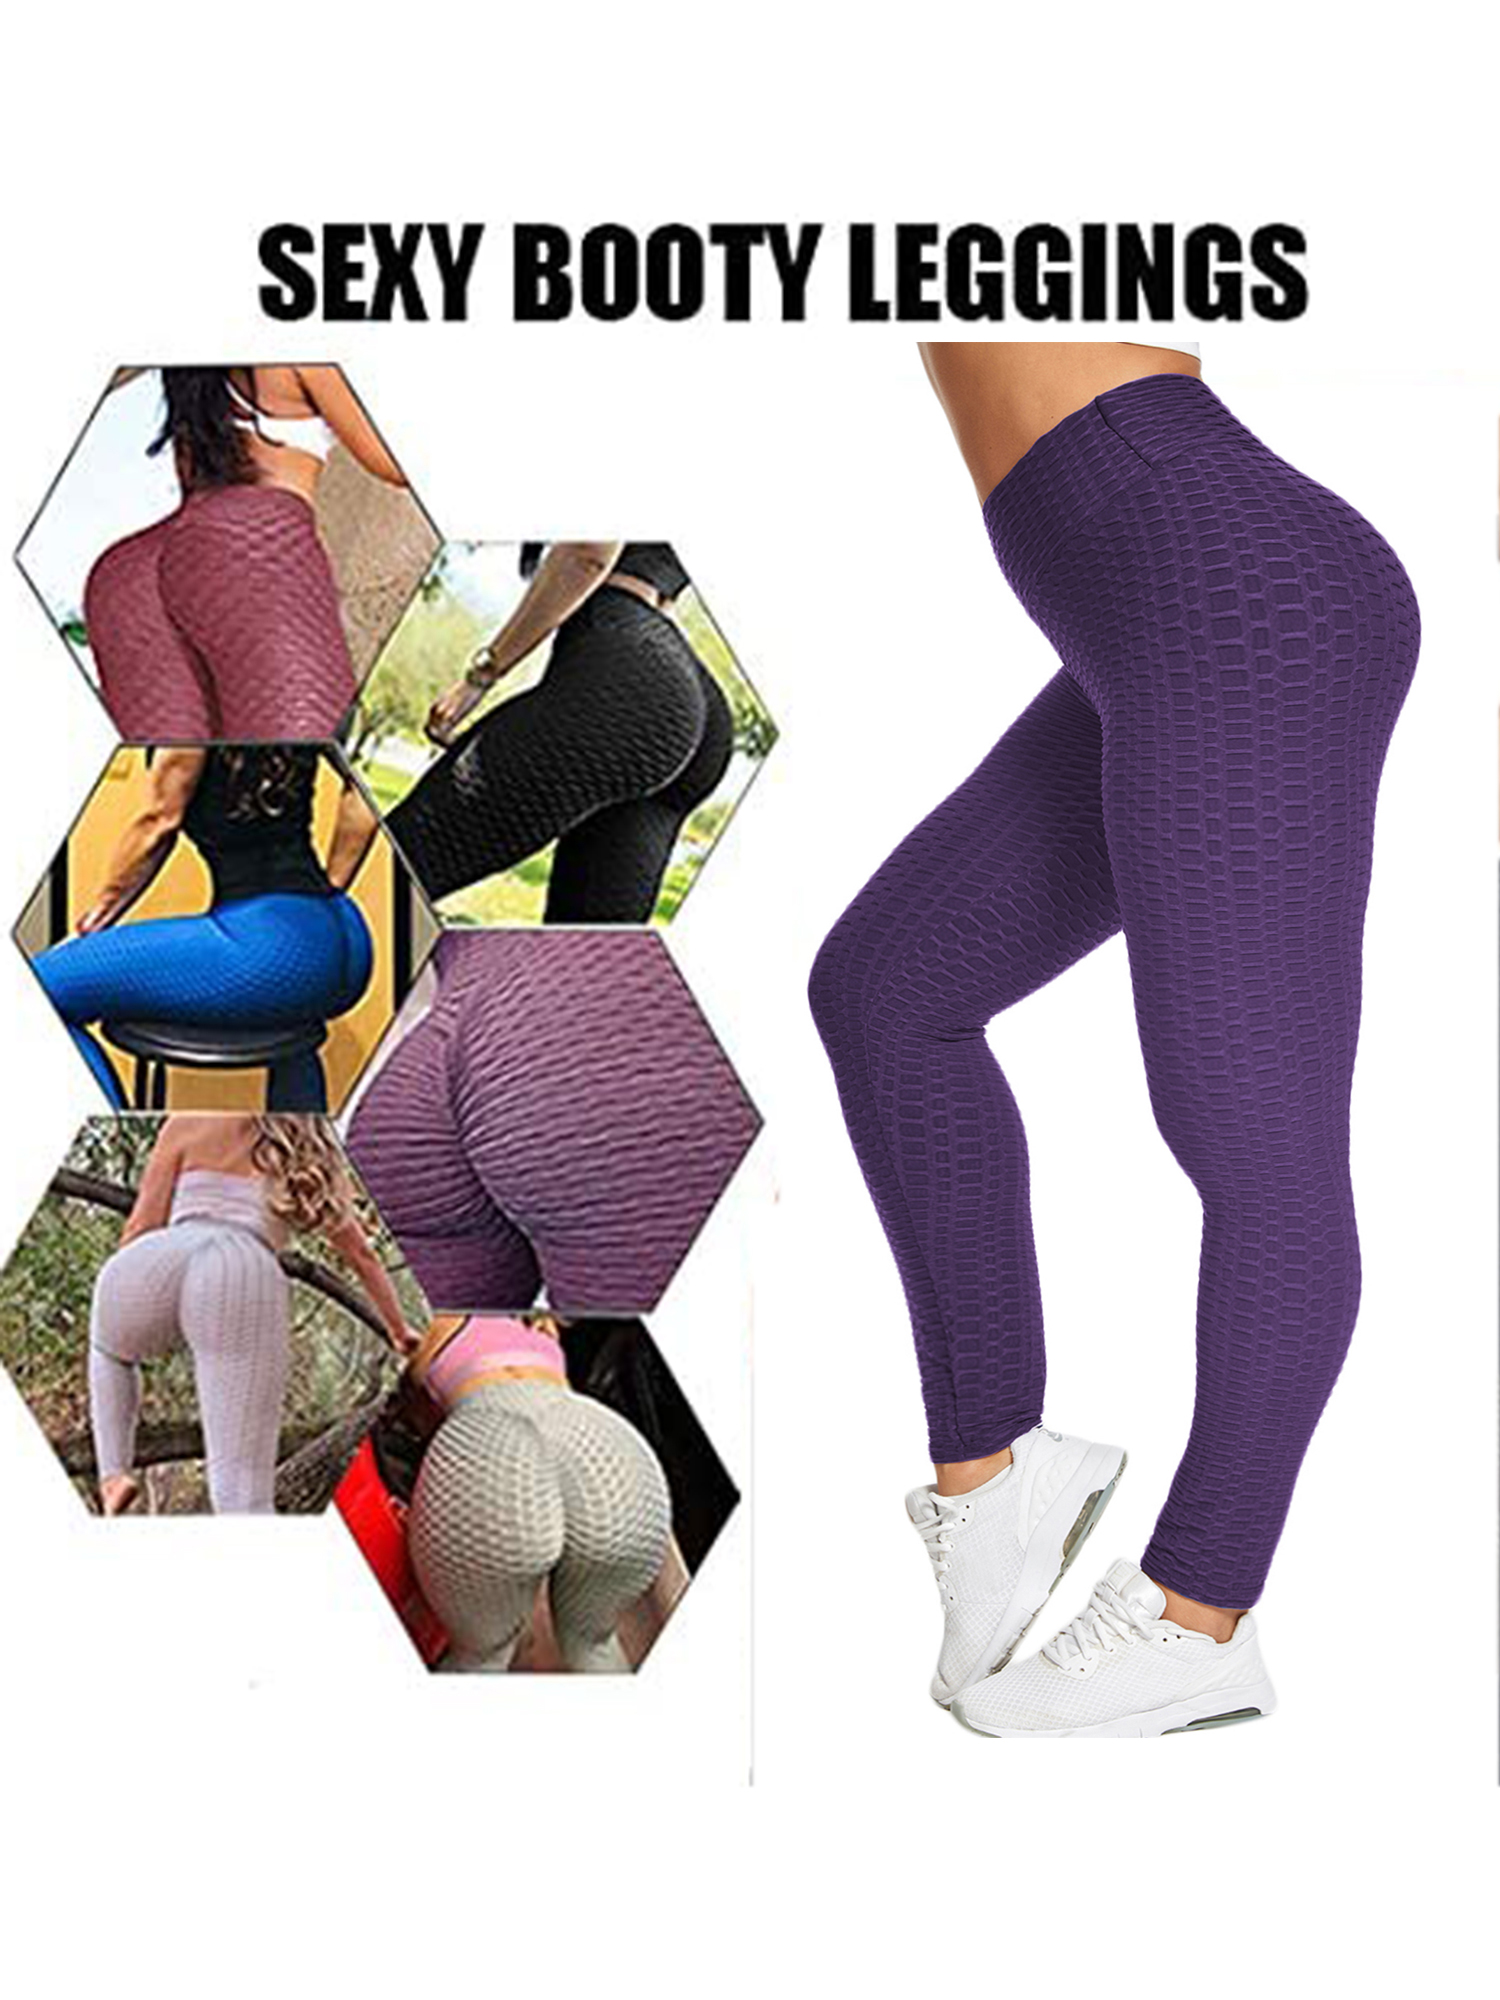 LELINTA Women's High Waist Yoga Pants Textured Ruched Butt Lifting Leggings  Workout Tummy Control Sport Tights 